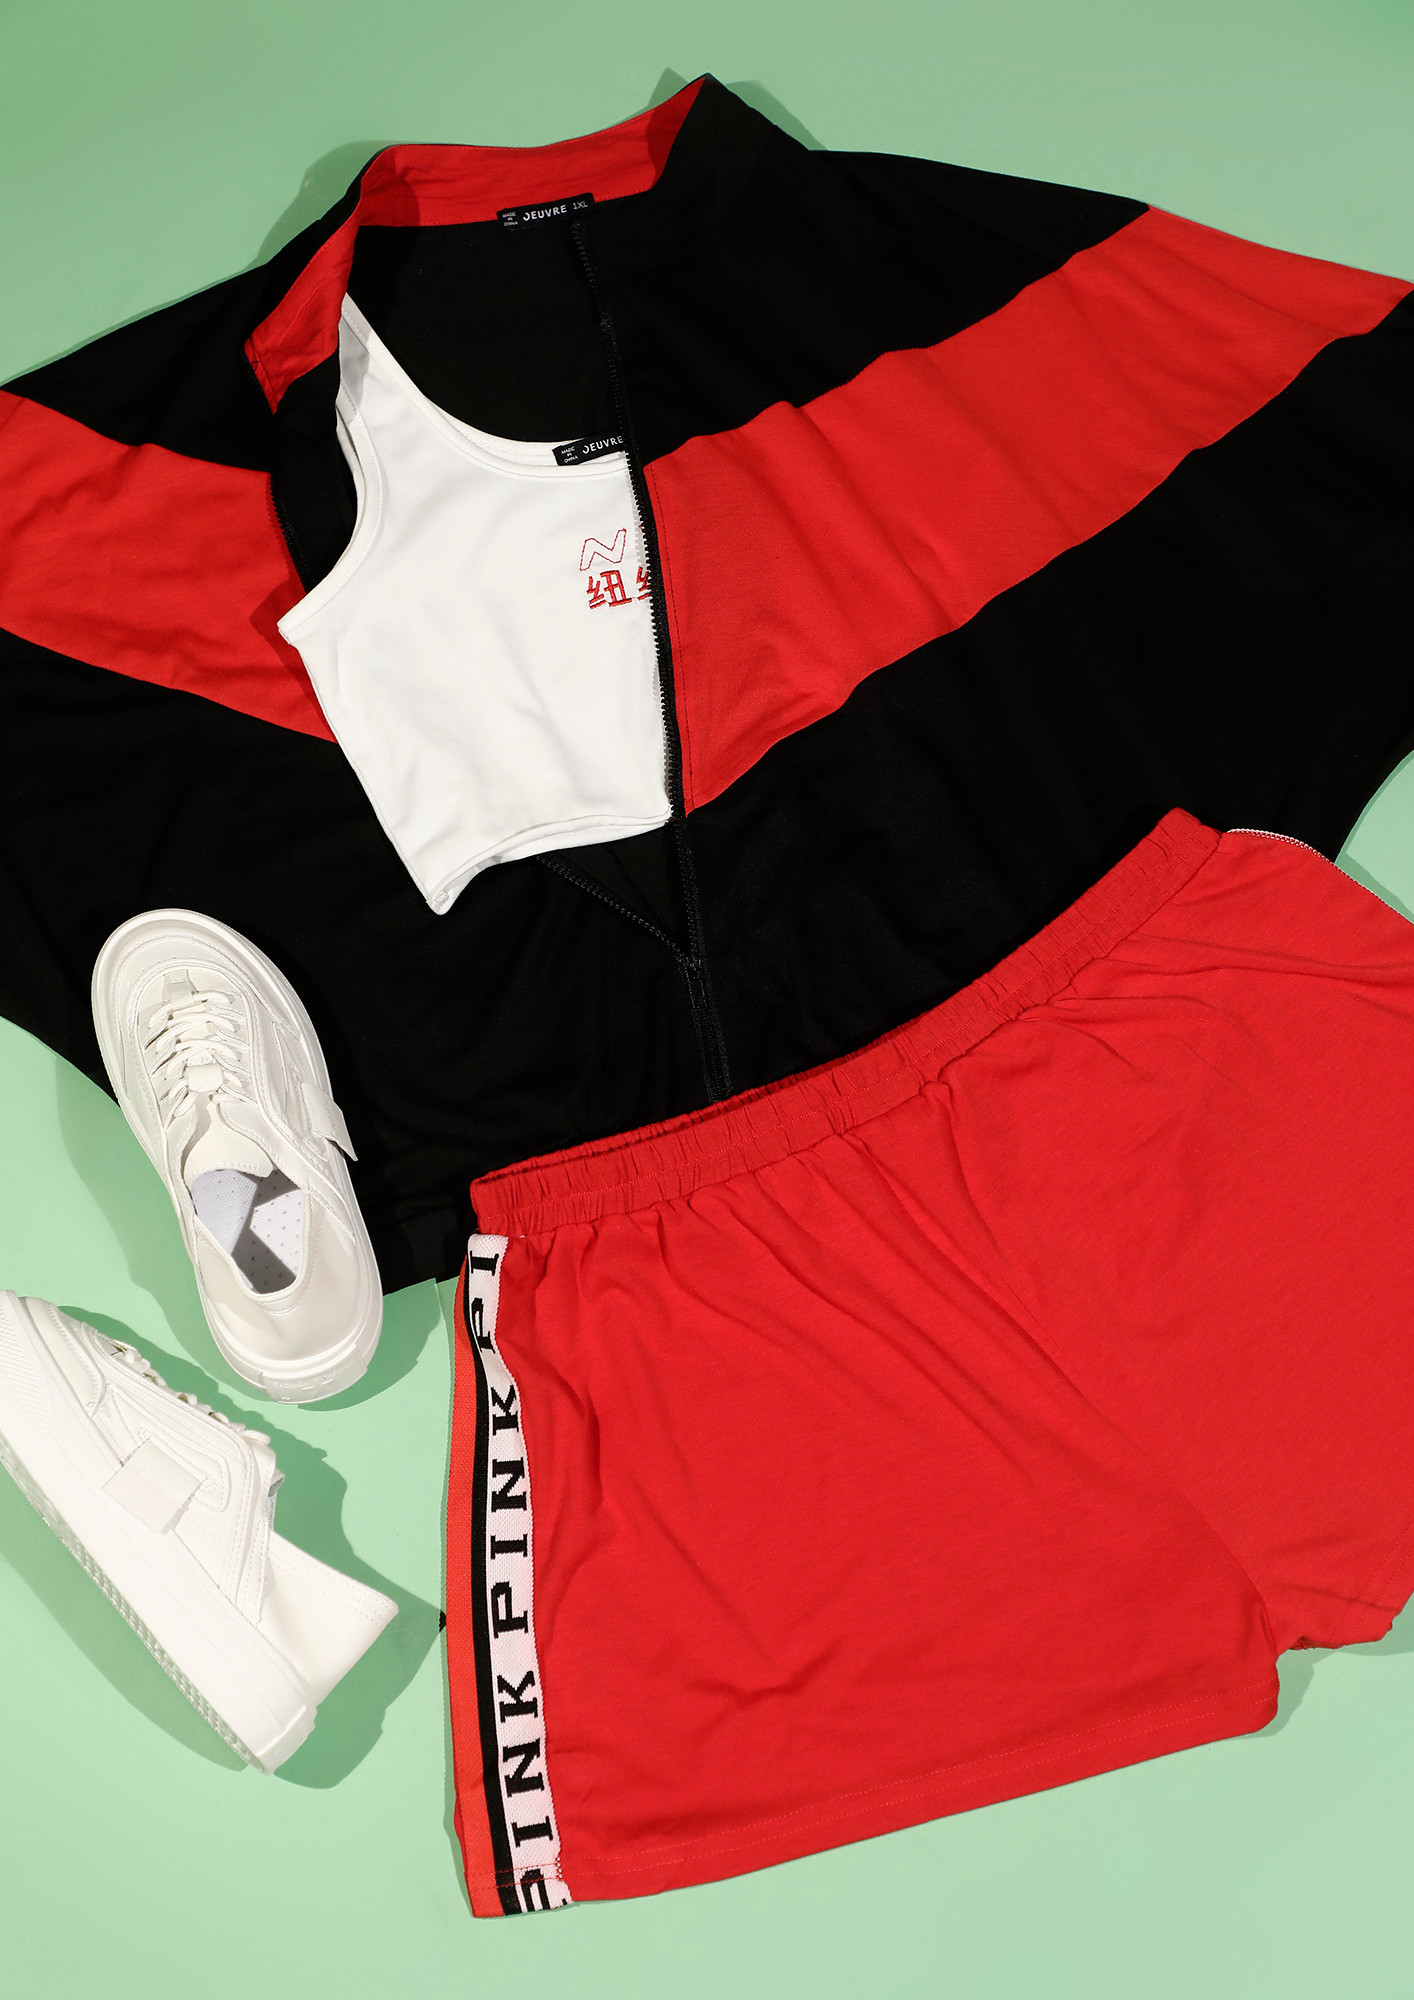 ON-RUN-TO-THE-PARK-ZZTZ-18SS-1018-F, RED, SPORTS, COLOUR BLOCK STRIPE DETAILS, TWO-PIECE SET